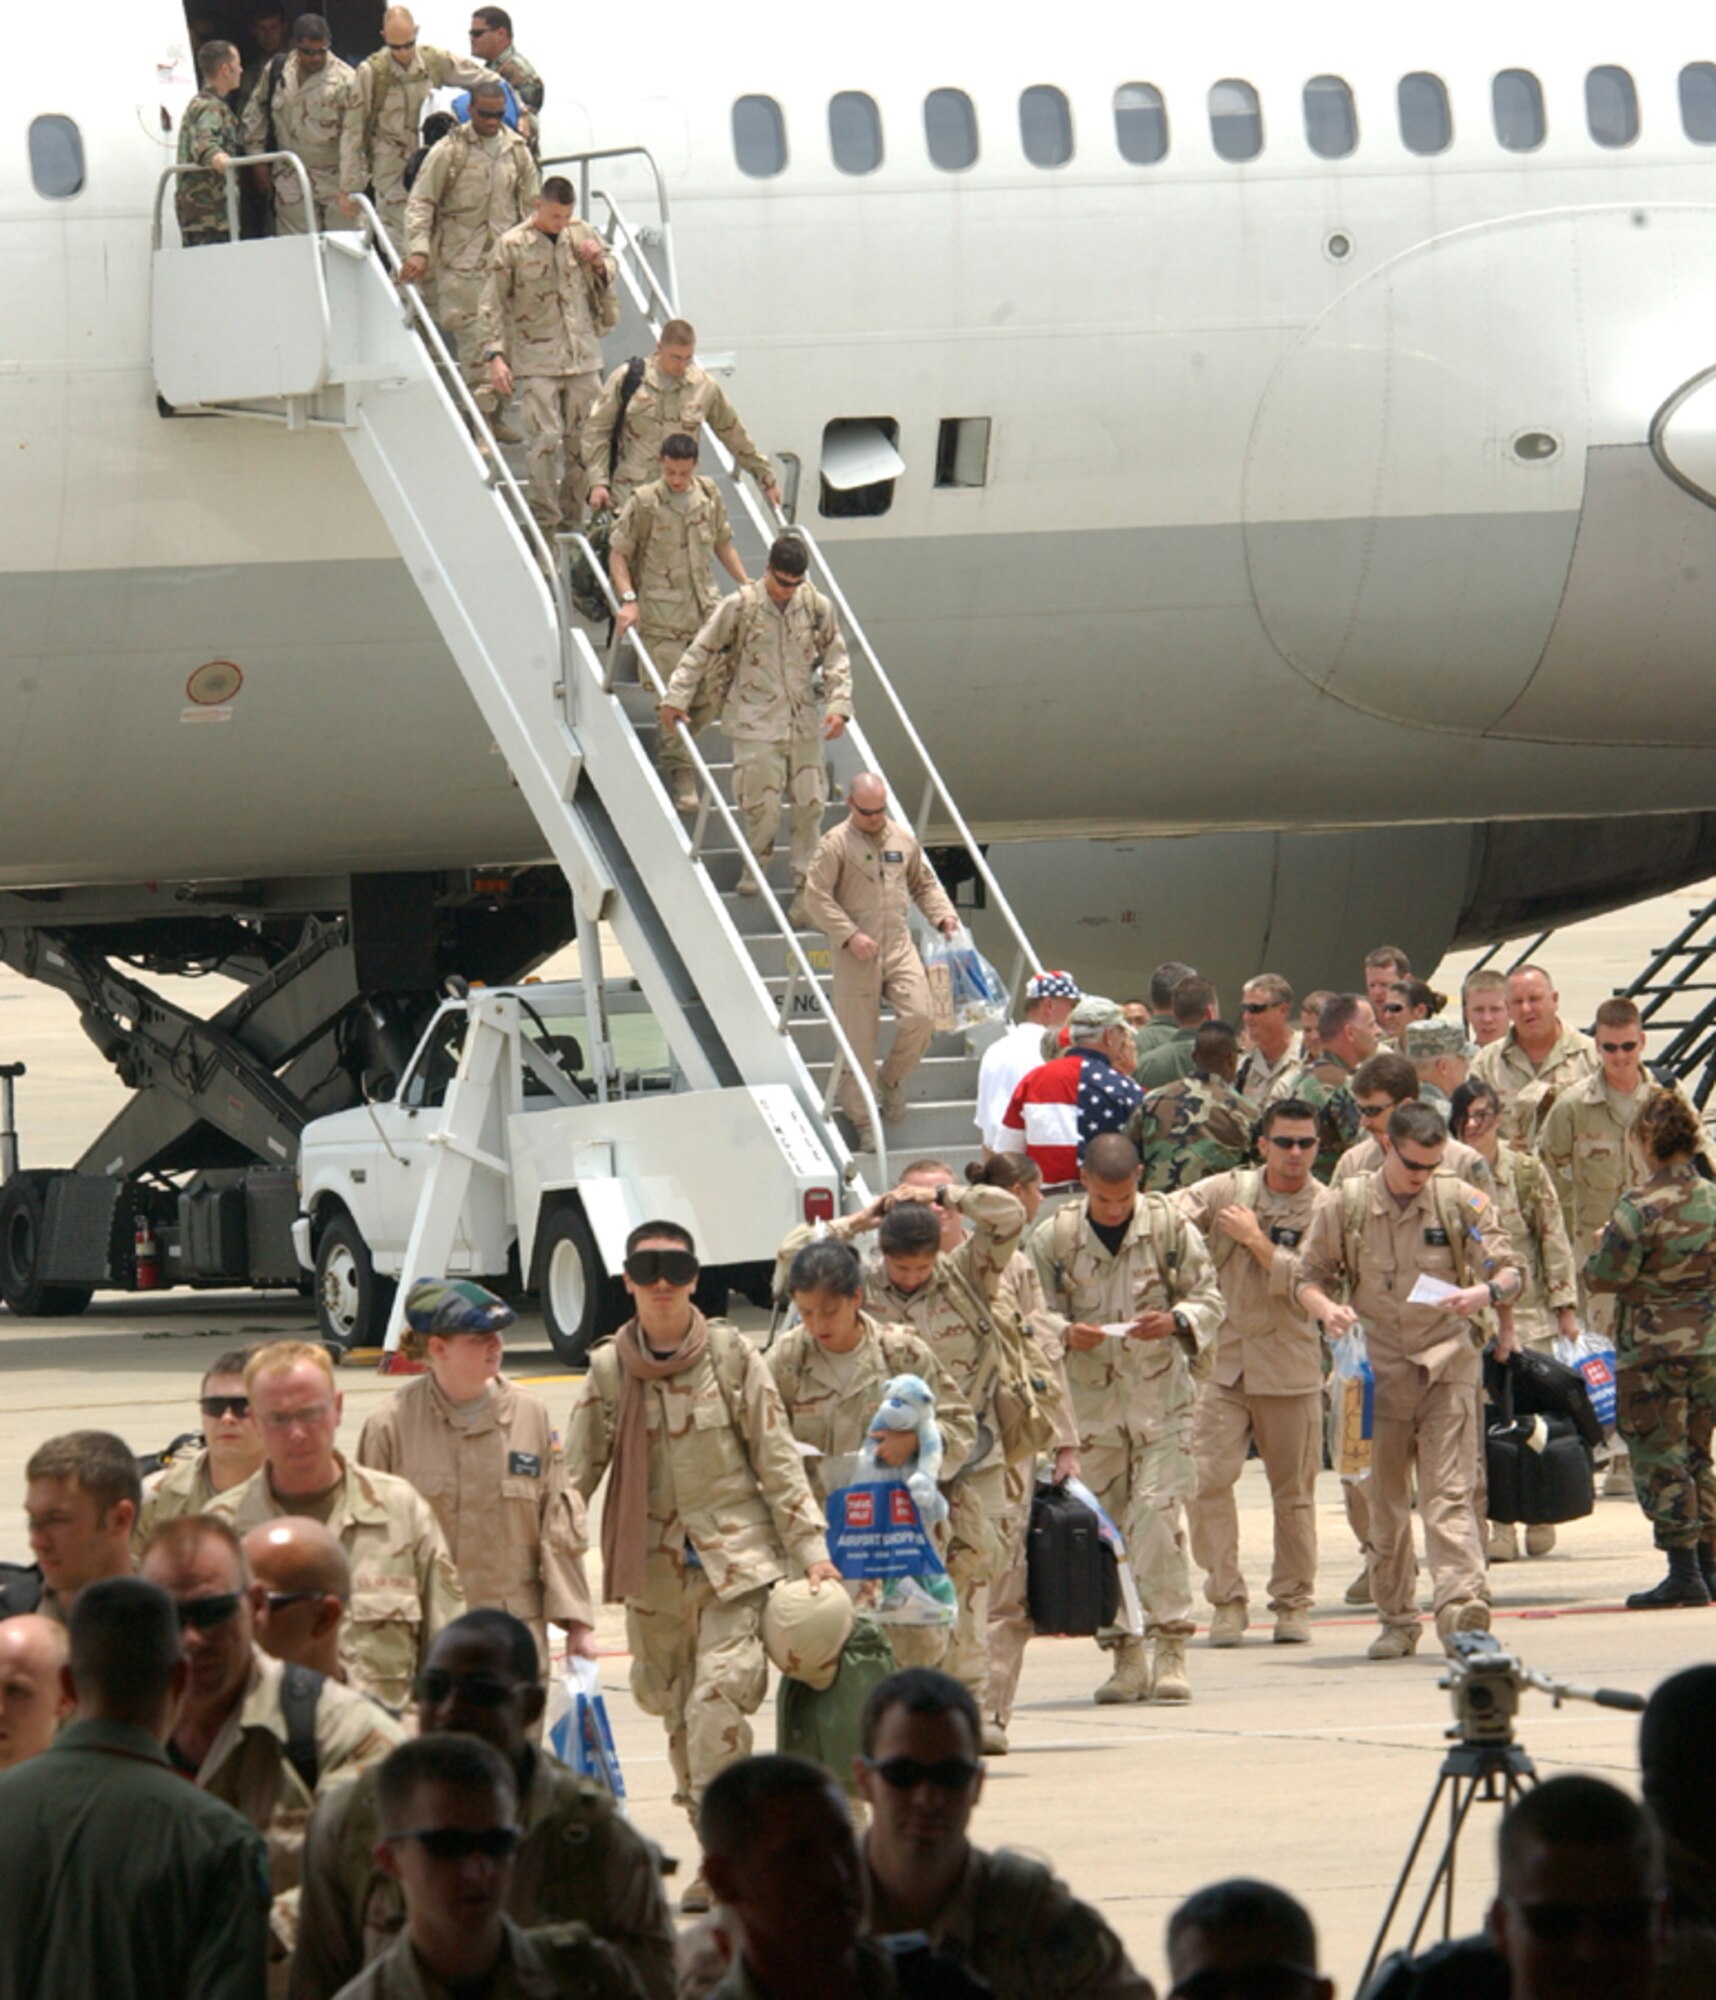 Airmen step off their plane and head for the arms of the loved ones they haven't seen in months while they were deployed to Iraq and Afghanistan. More than 200 Airmen returned to Hurlburt Field July 4.  (U.S. Air Force photo by Tech. Sgt. Angela Shepherd)